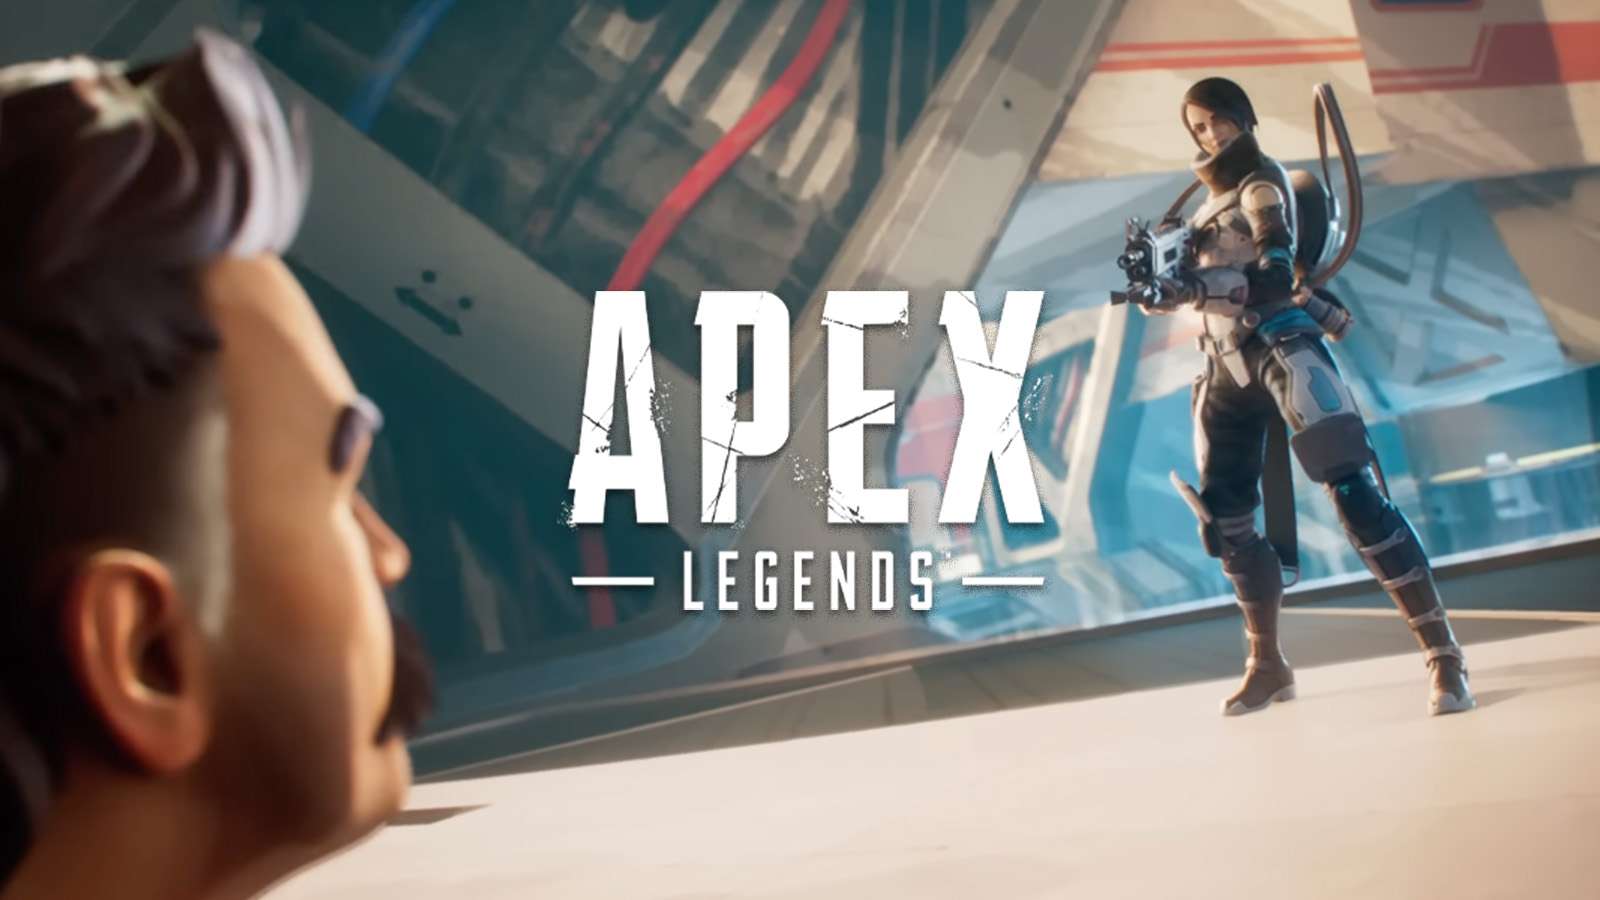 Catalyst aiming at Fuse from Apex Legends Eclipse Trailer